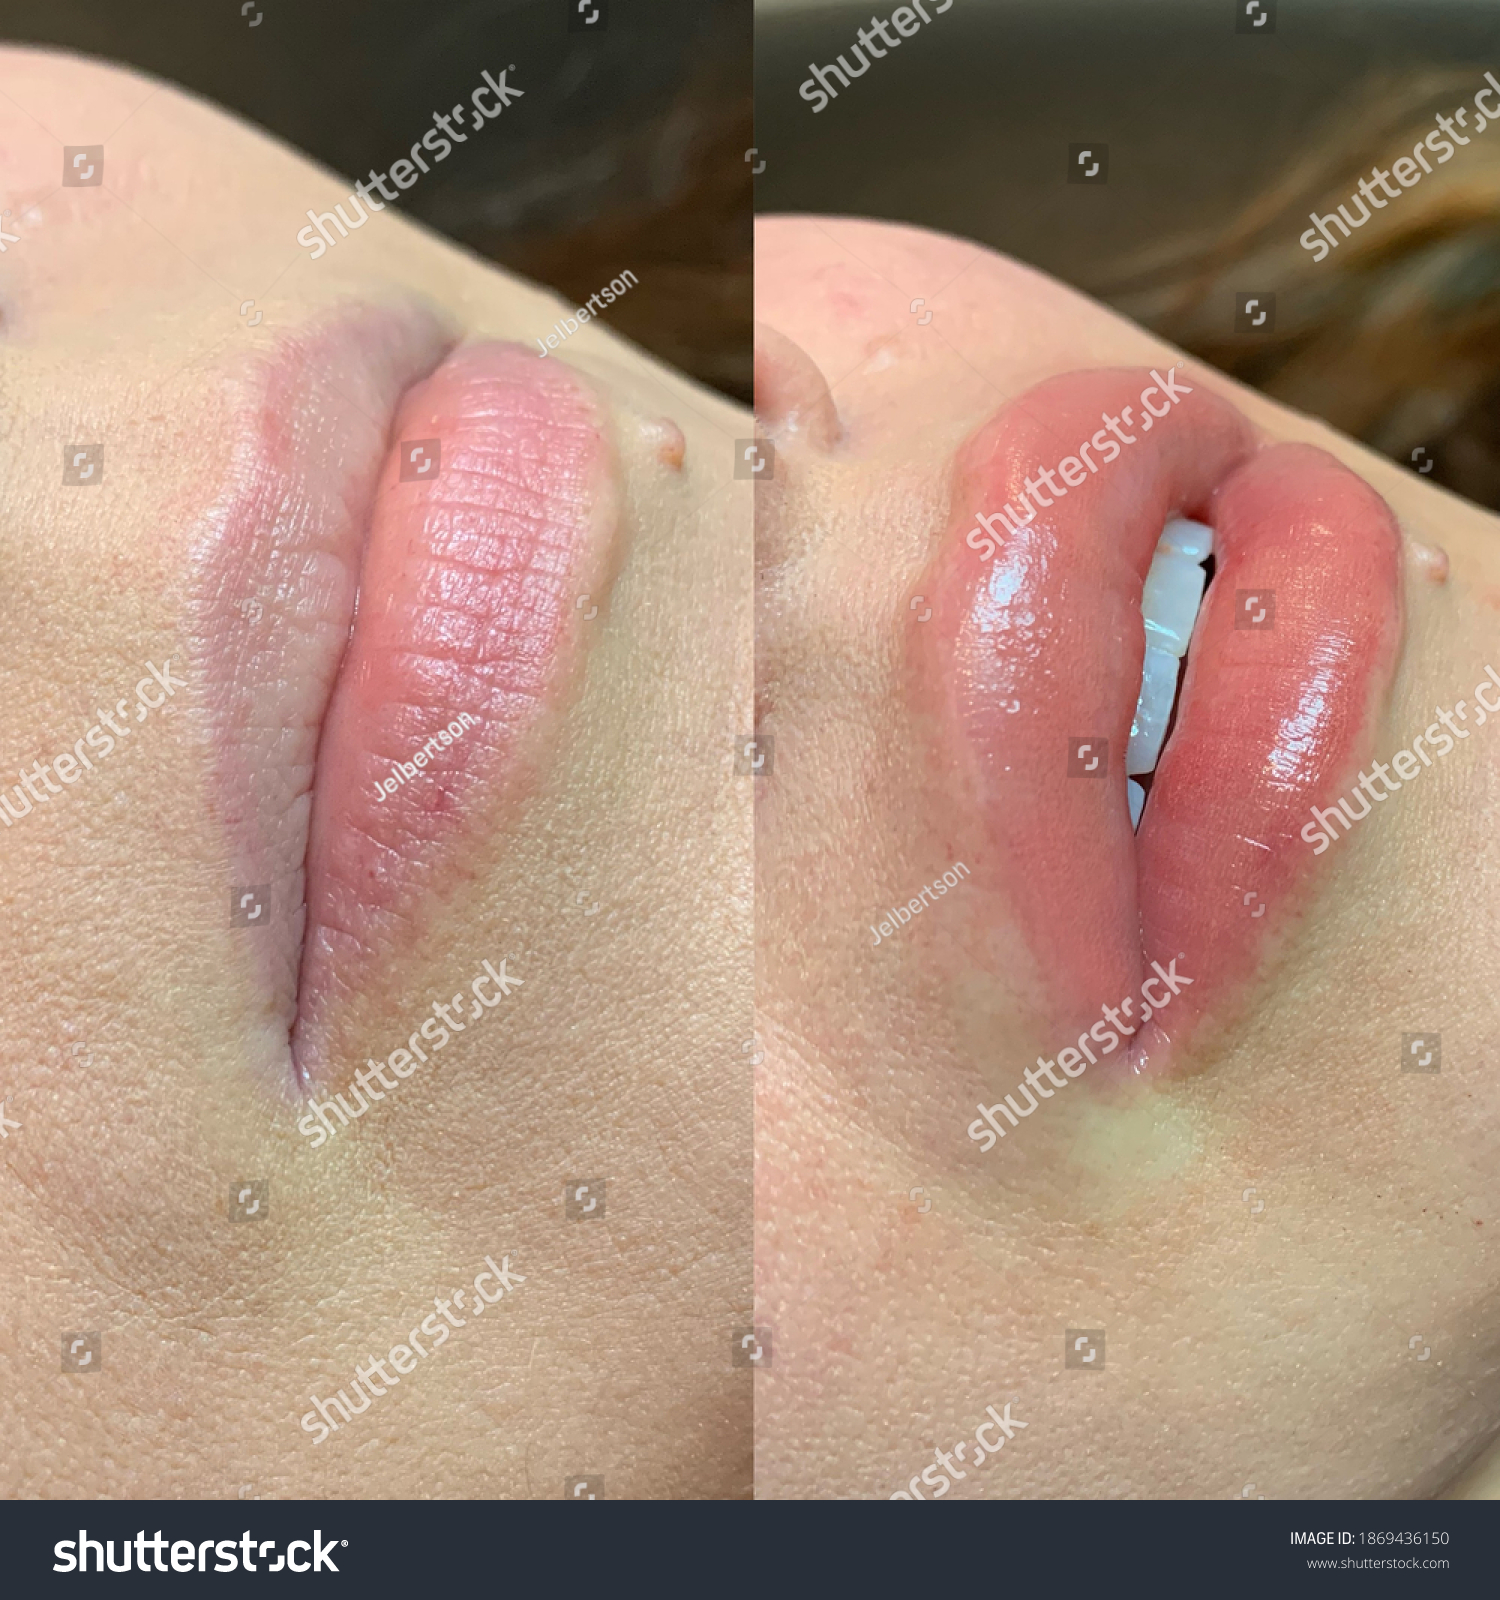 Lip blush tattoo treatment before and after #1869436150